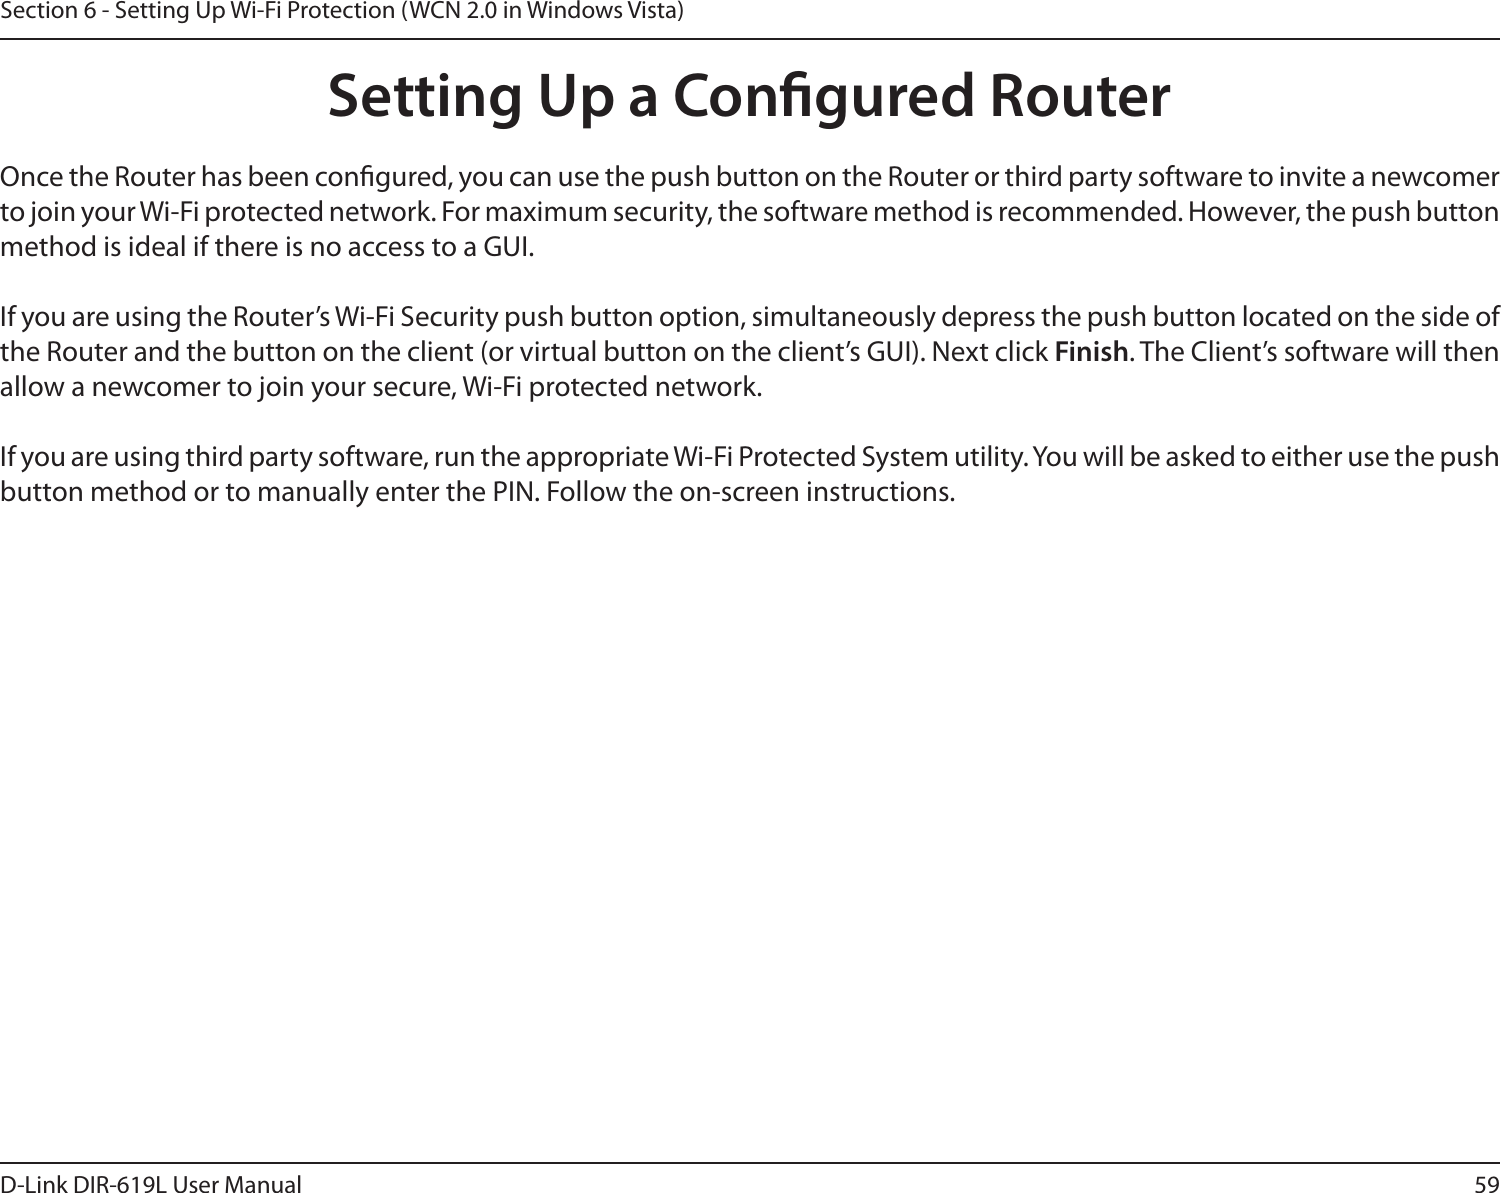 59D-Link DIR-619L User ManualSection 6 - Setting Up Wi-Fi Protection (WCN 2.0 in Windows Vista)Setting Up a Congured RouterOnce the Router has been congured, you can use the push button on the Router or third party software to invite a newcomer to join your Wi-Fi protected network. For maximum security, the software method is recommended. However, the push button method is ideal if there is no access to a GUI.If you are using the Router’s Wi-Fi Security push button option, simultaneously depress the push button located on the side of the Router and the button on the client (or virtual button on the client’s GUI). Next click Finish. The Client’s software will then allow a newcomer to join your secure, Wi-Fi protected network.If you are using third party software, run the appropriate Wi-Fi Protected System utility. You will be asked to either use the push button method or to manually enter the PIN. Follow the on-screen instructions.        